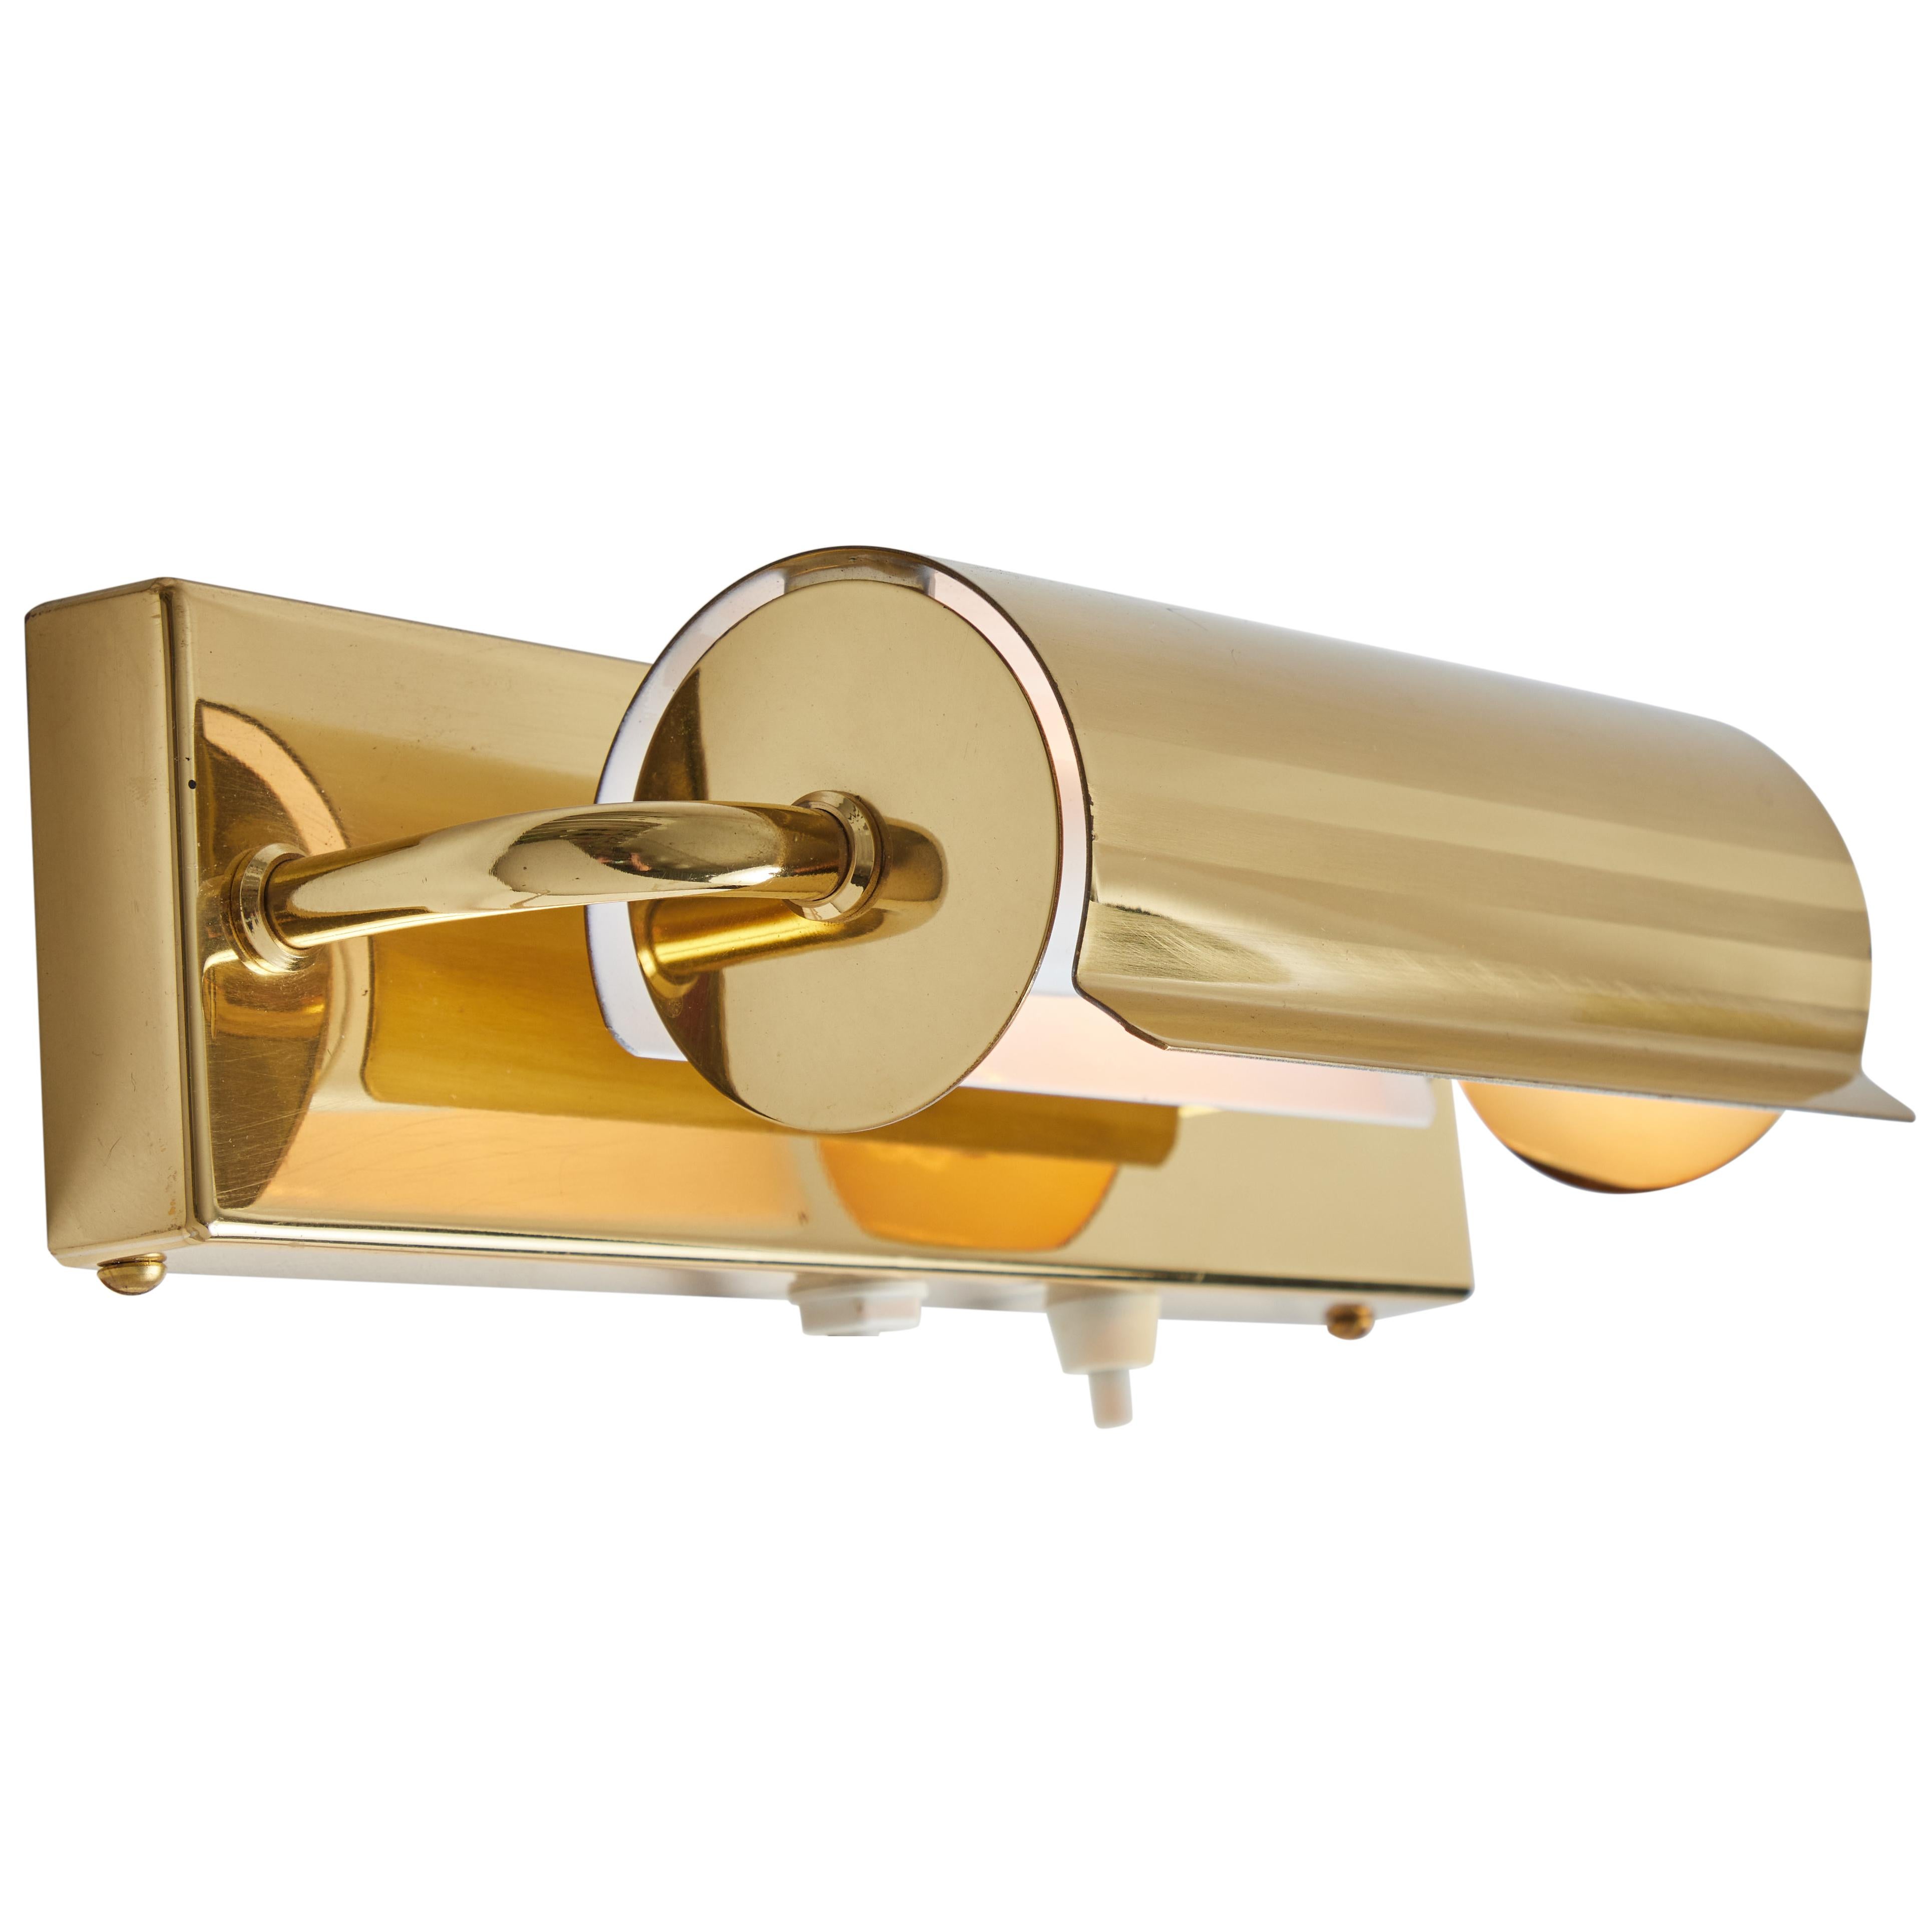 1960s Scandinavian brass rotating wall lamp in the Style of Charlotte Perriand. Produced in Scandinavia in the 1960s. A refined and elegant lamp executed in brass with a shade that rotates freely around the bulb. Reminiscent of the Charlotte